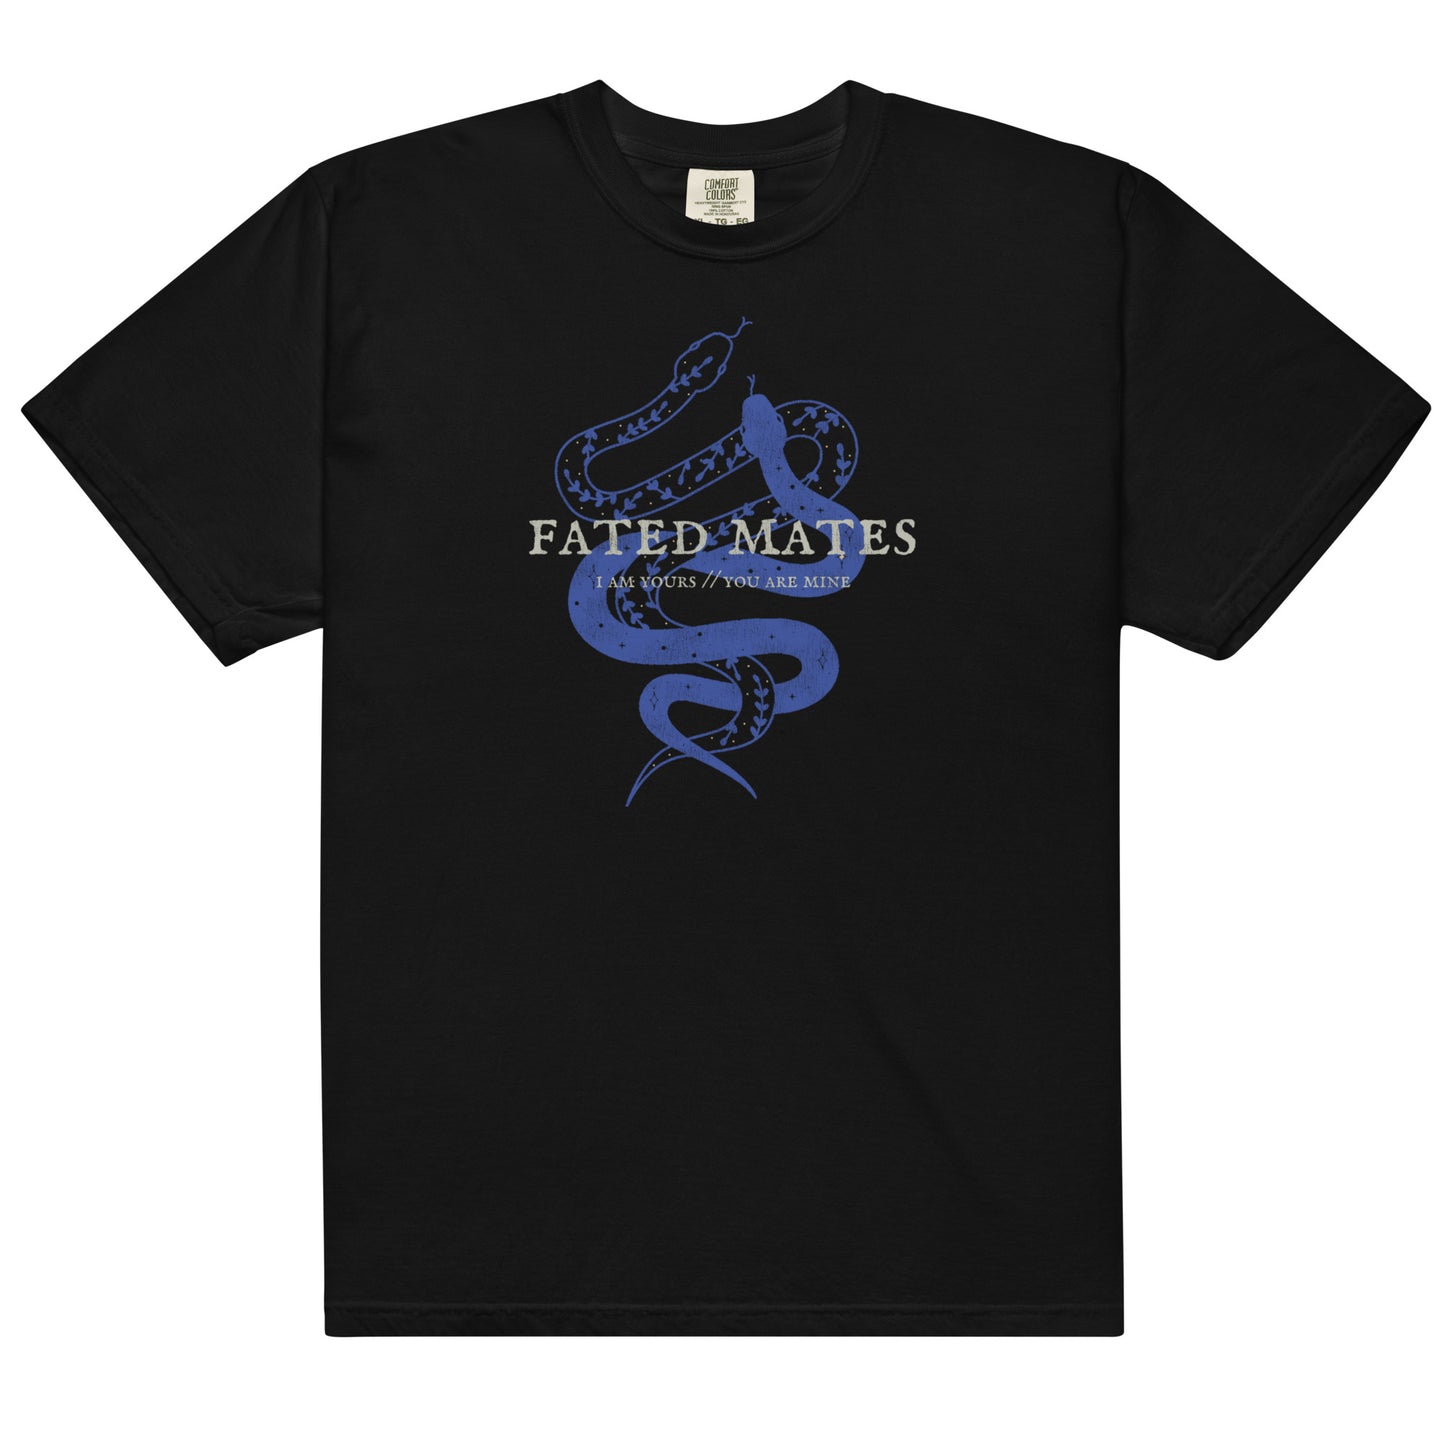 fated mates t-shirt in black